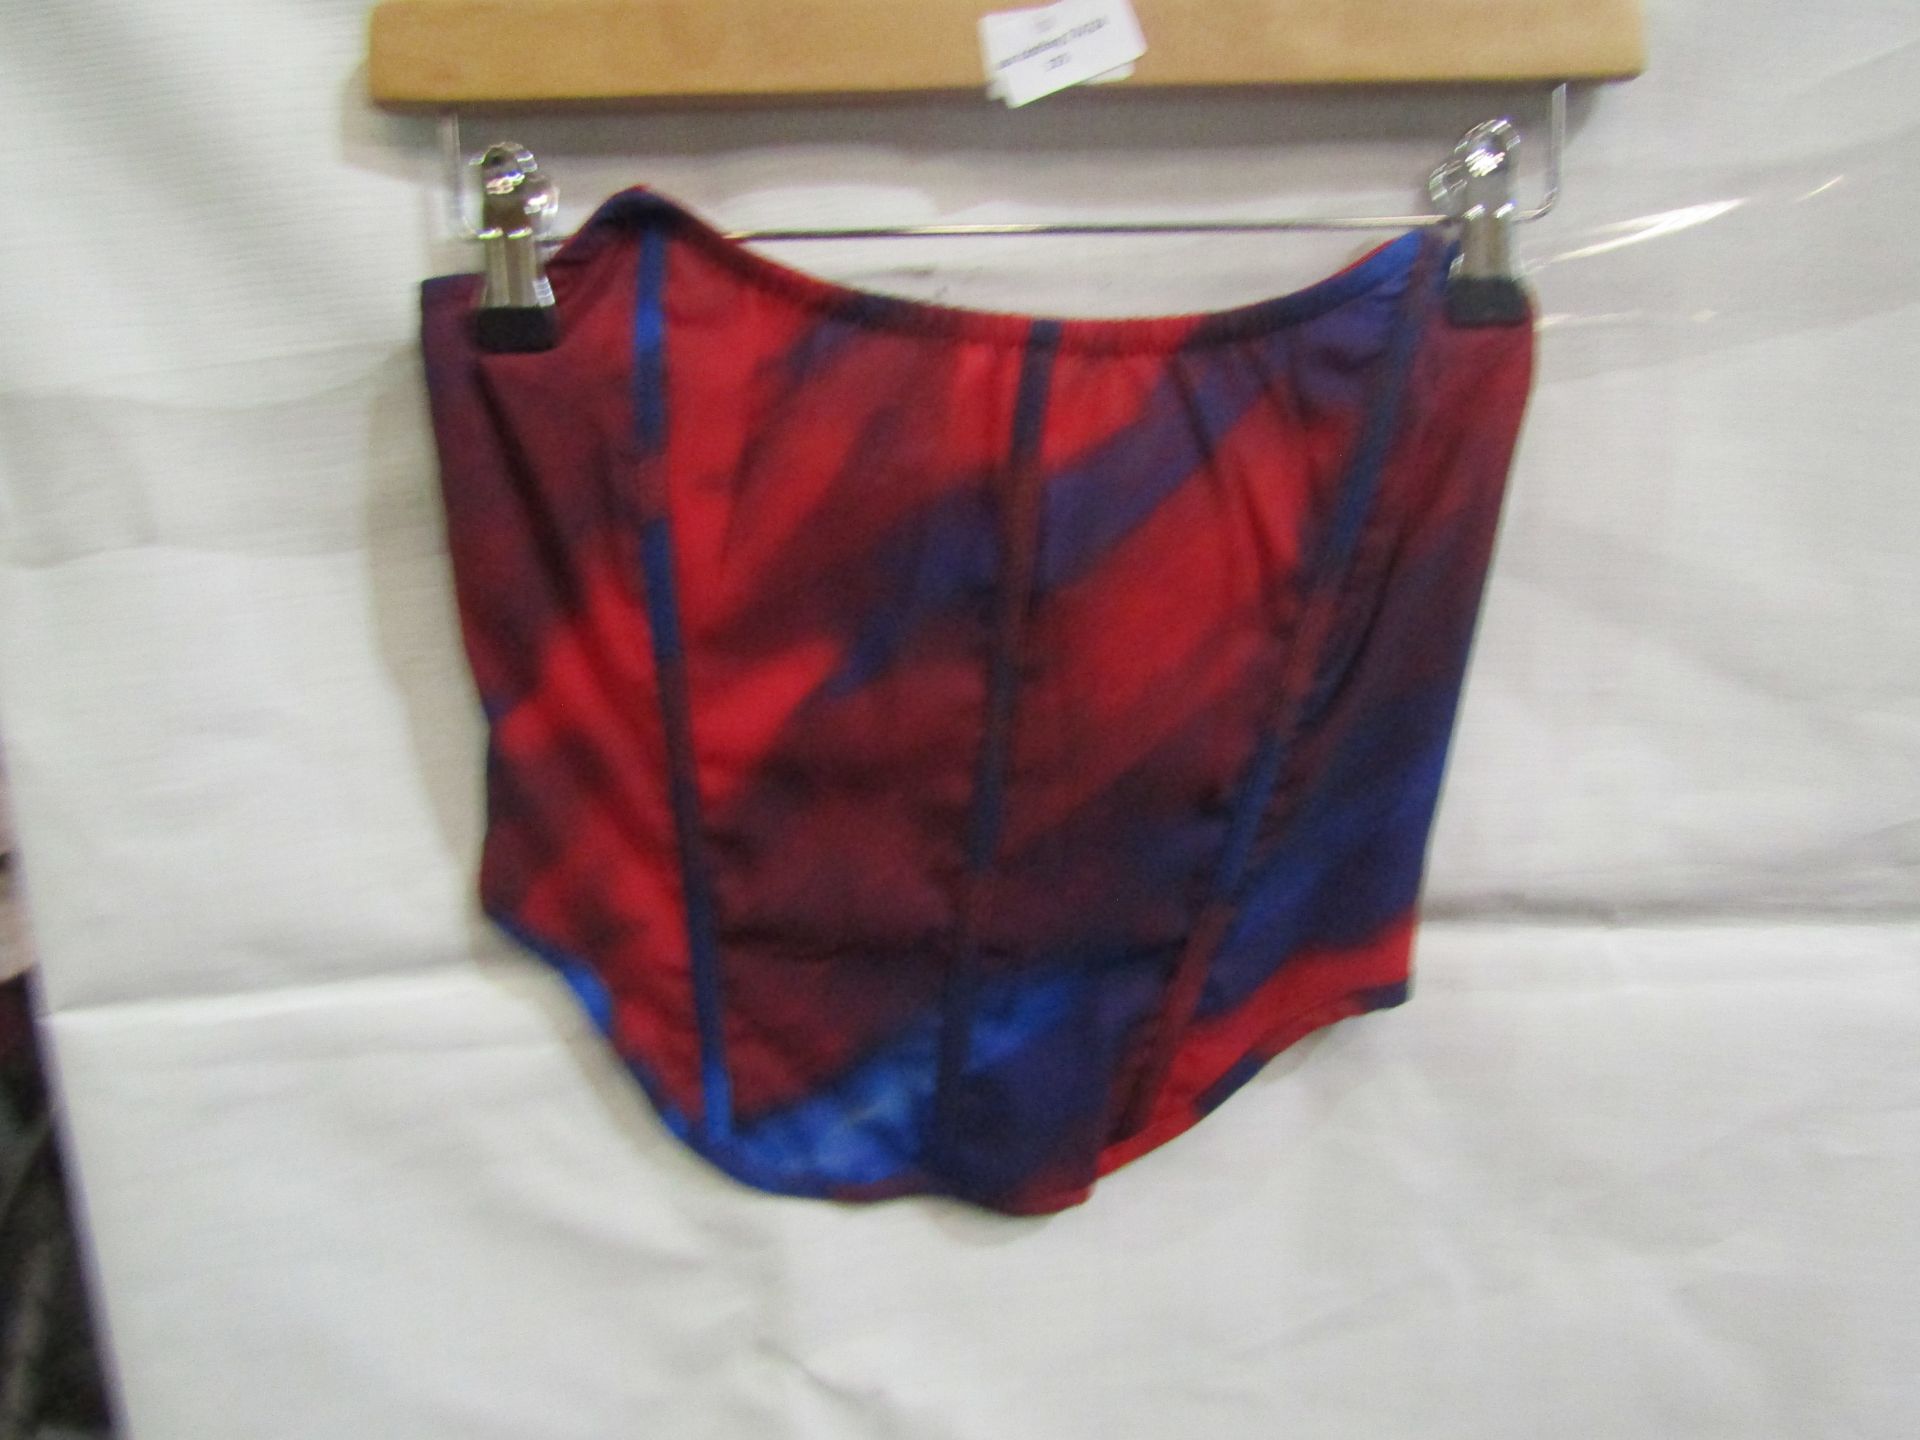 3 x Pretty Little Thing Red Abstract Print Chiffon Structured Bandeau Corset - Size 12, New With